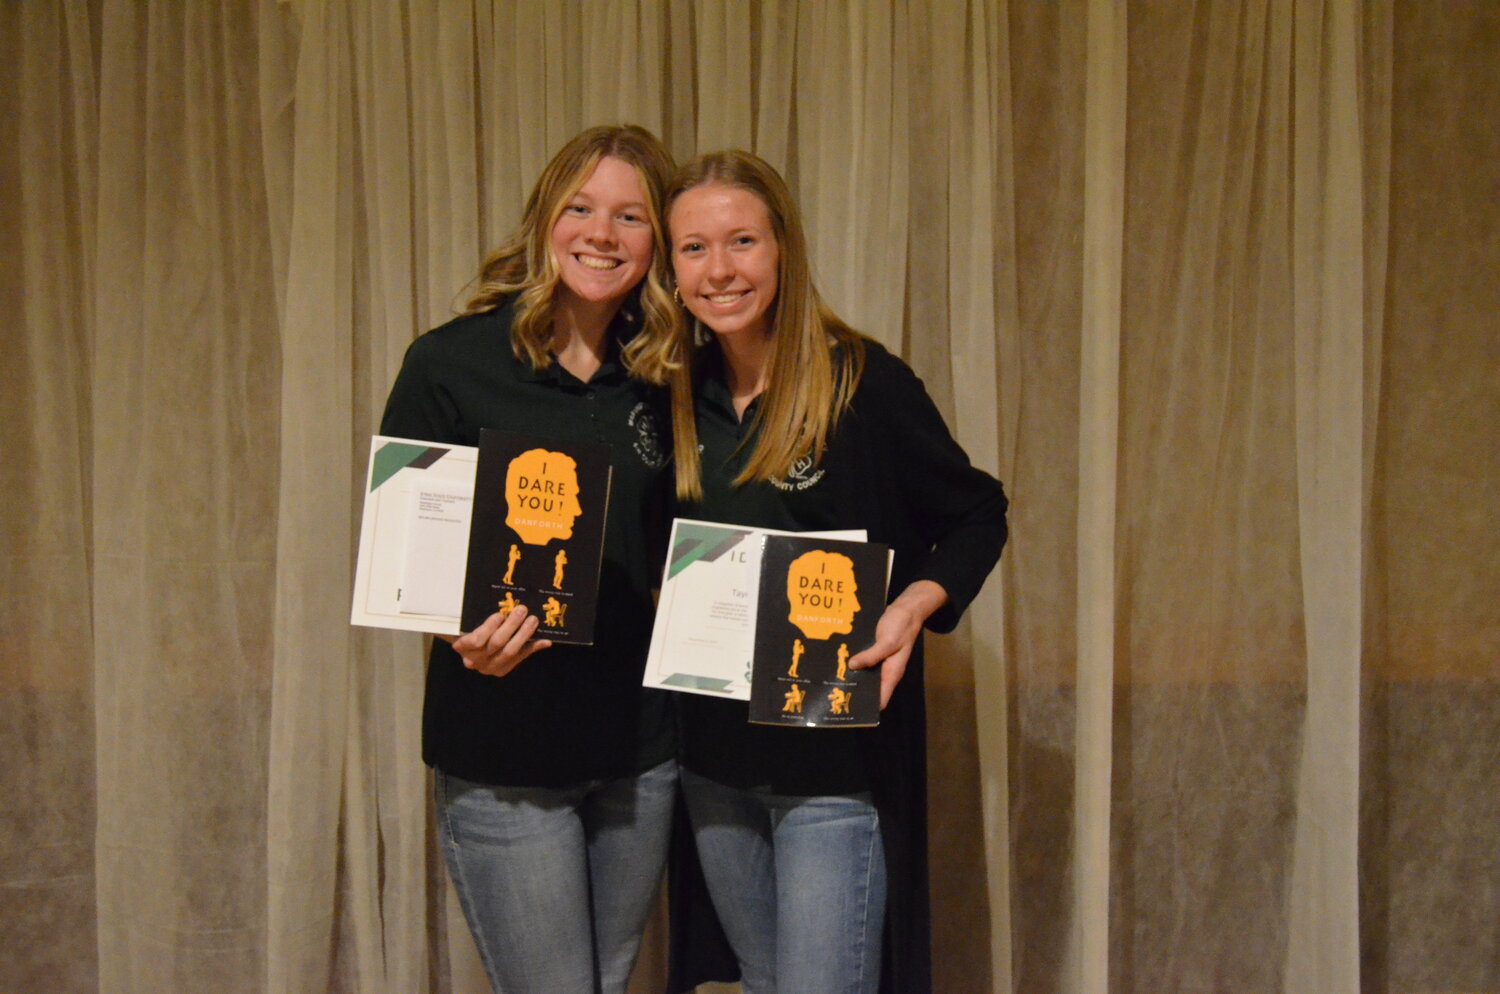 Zoey Dennler and Taylor Bartholomew were named the 2022-2023 recipients of the I Dare You Award at the 4-H Awards Celebration November 5.  This is the highest honor given to Washington County 4-H youth.